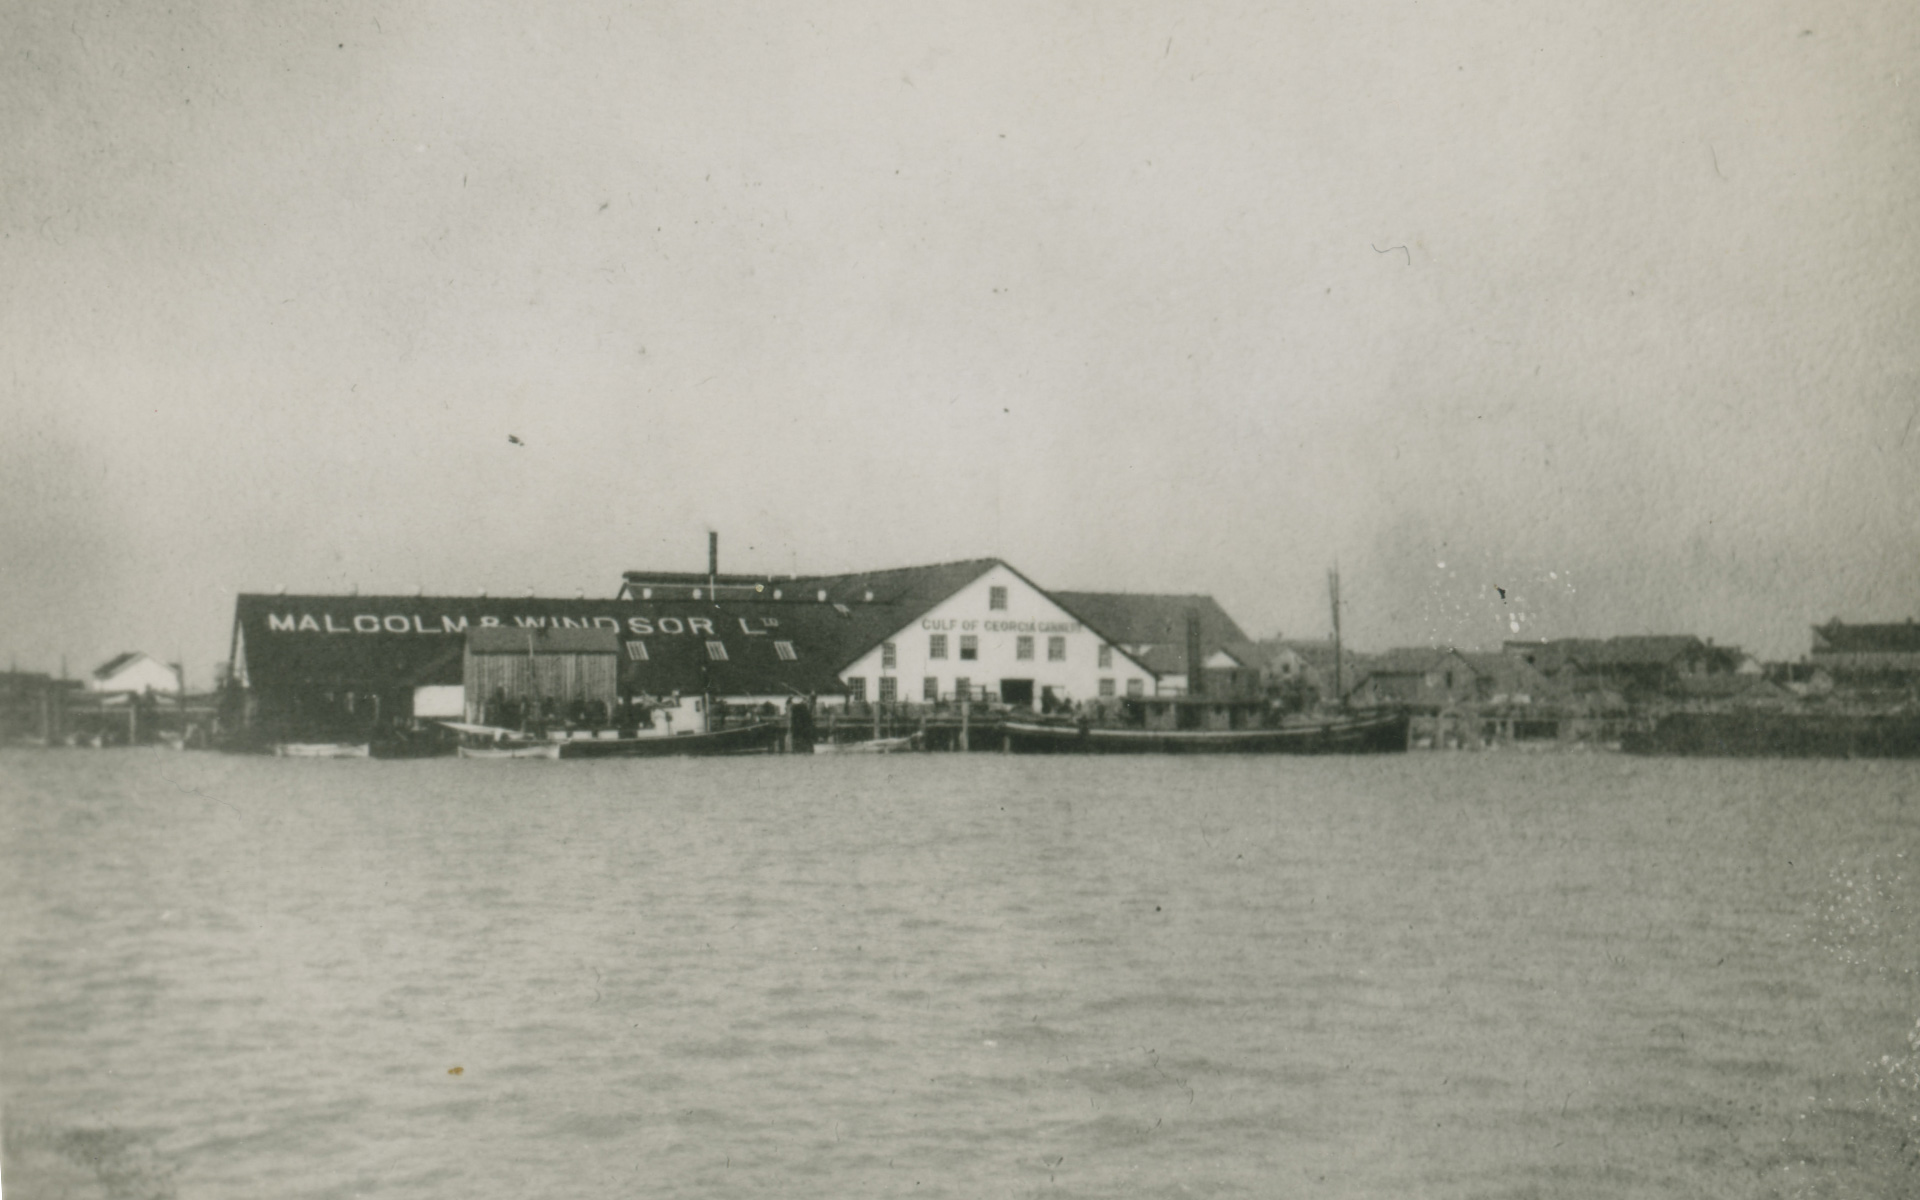 Gulf of Georgia Cannery buildings viewed from the water.